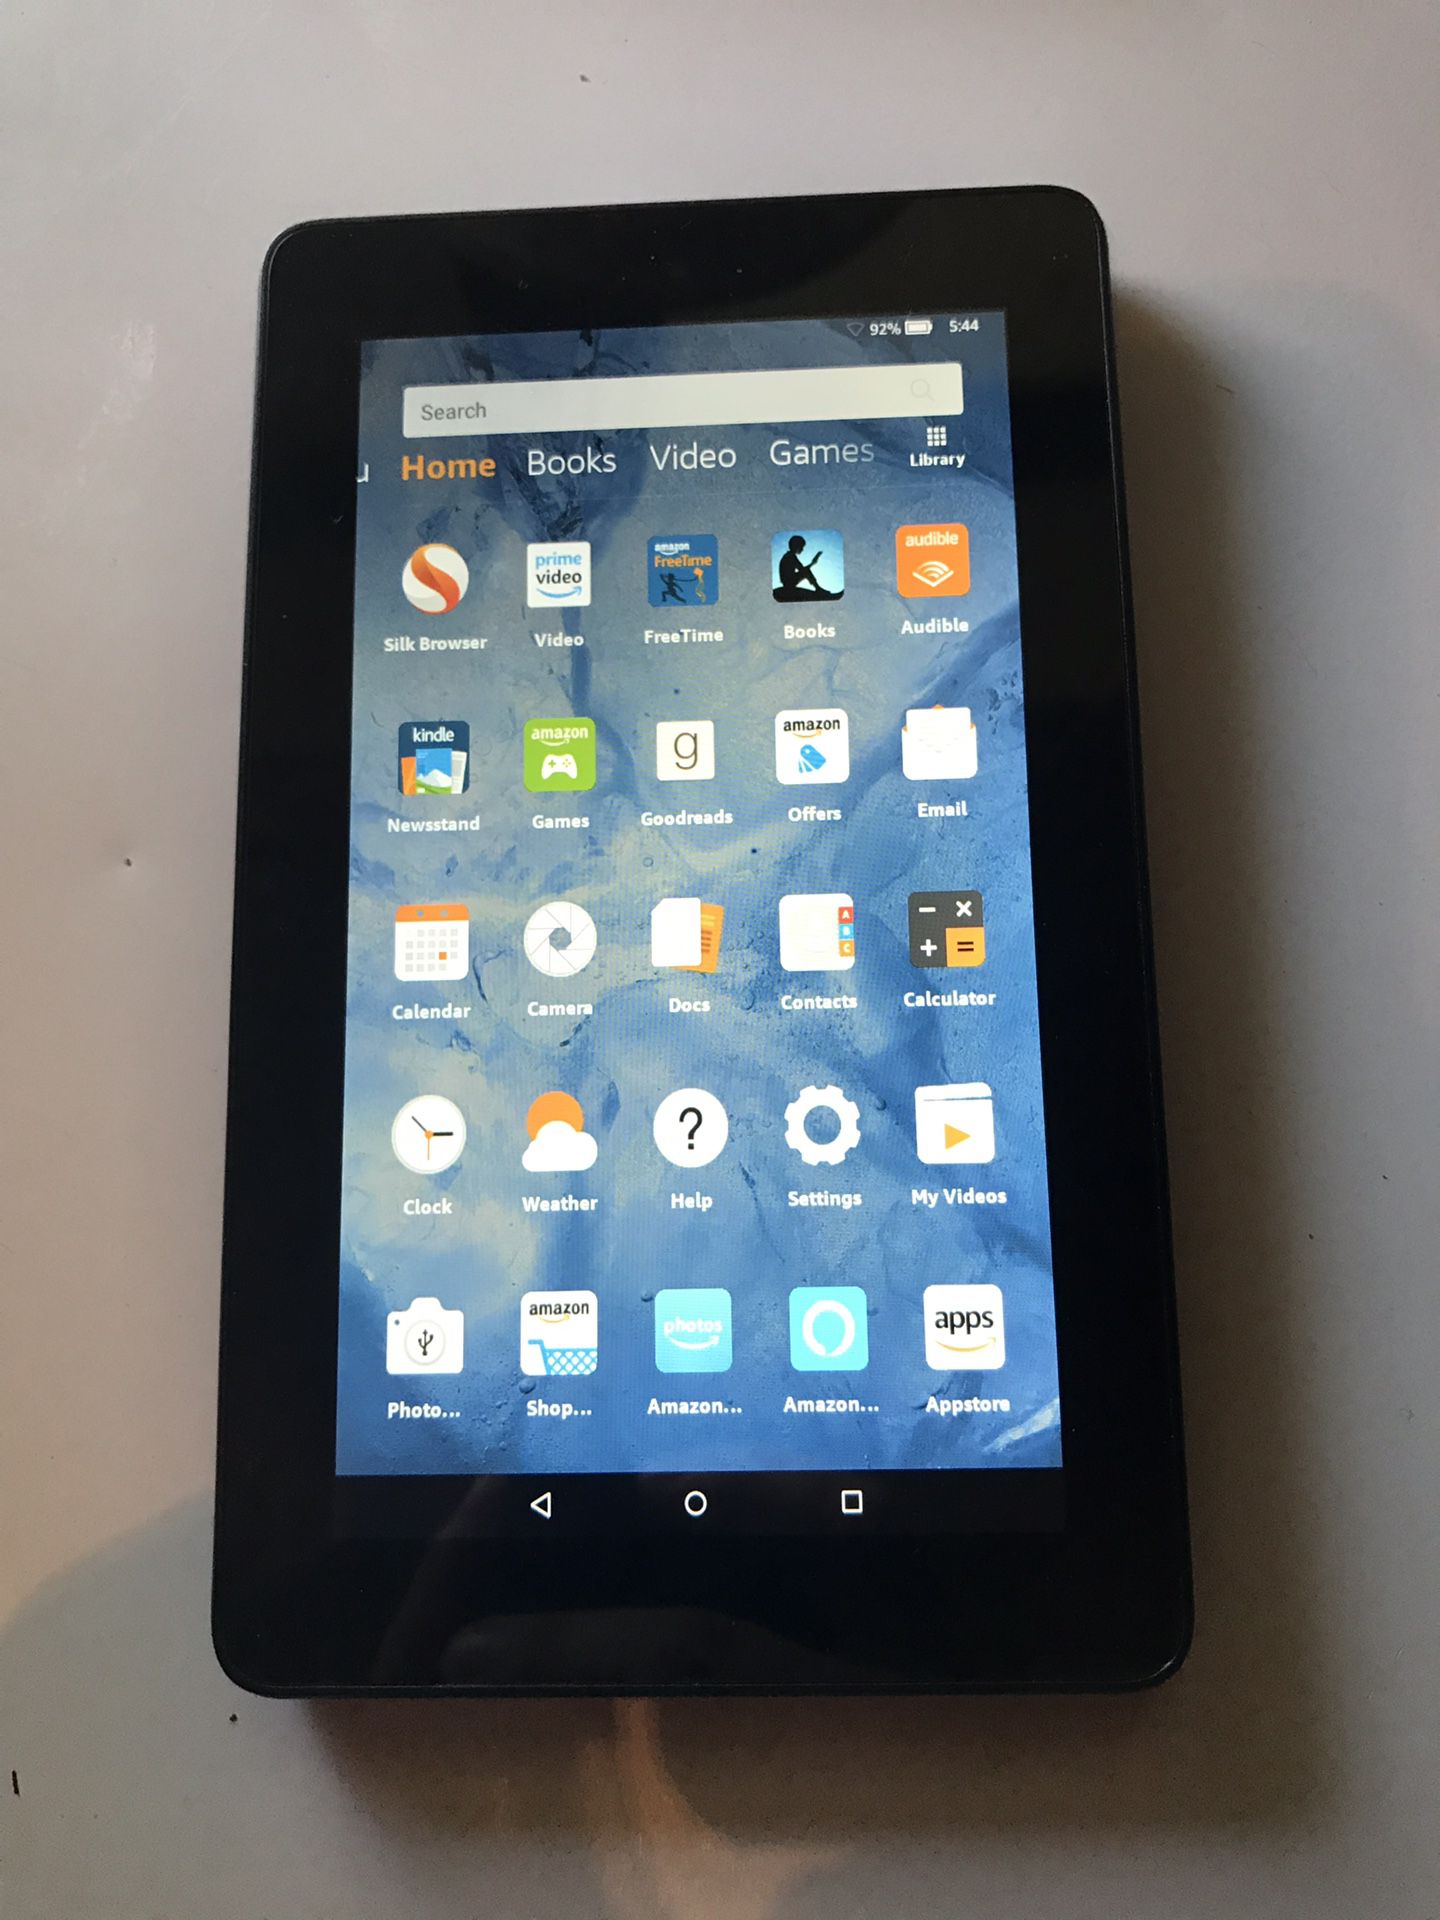 Kindle Fire like new not used much. Trade for iPhone 6s. Comes with case and charger. Perfect condition!